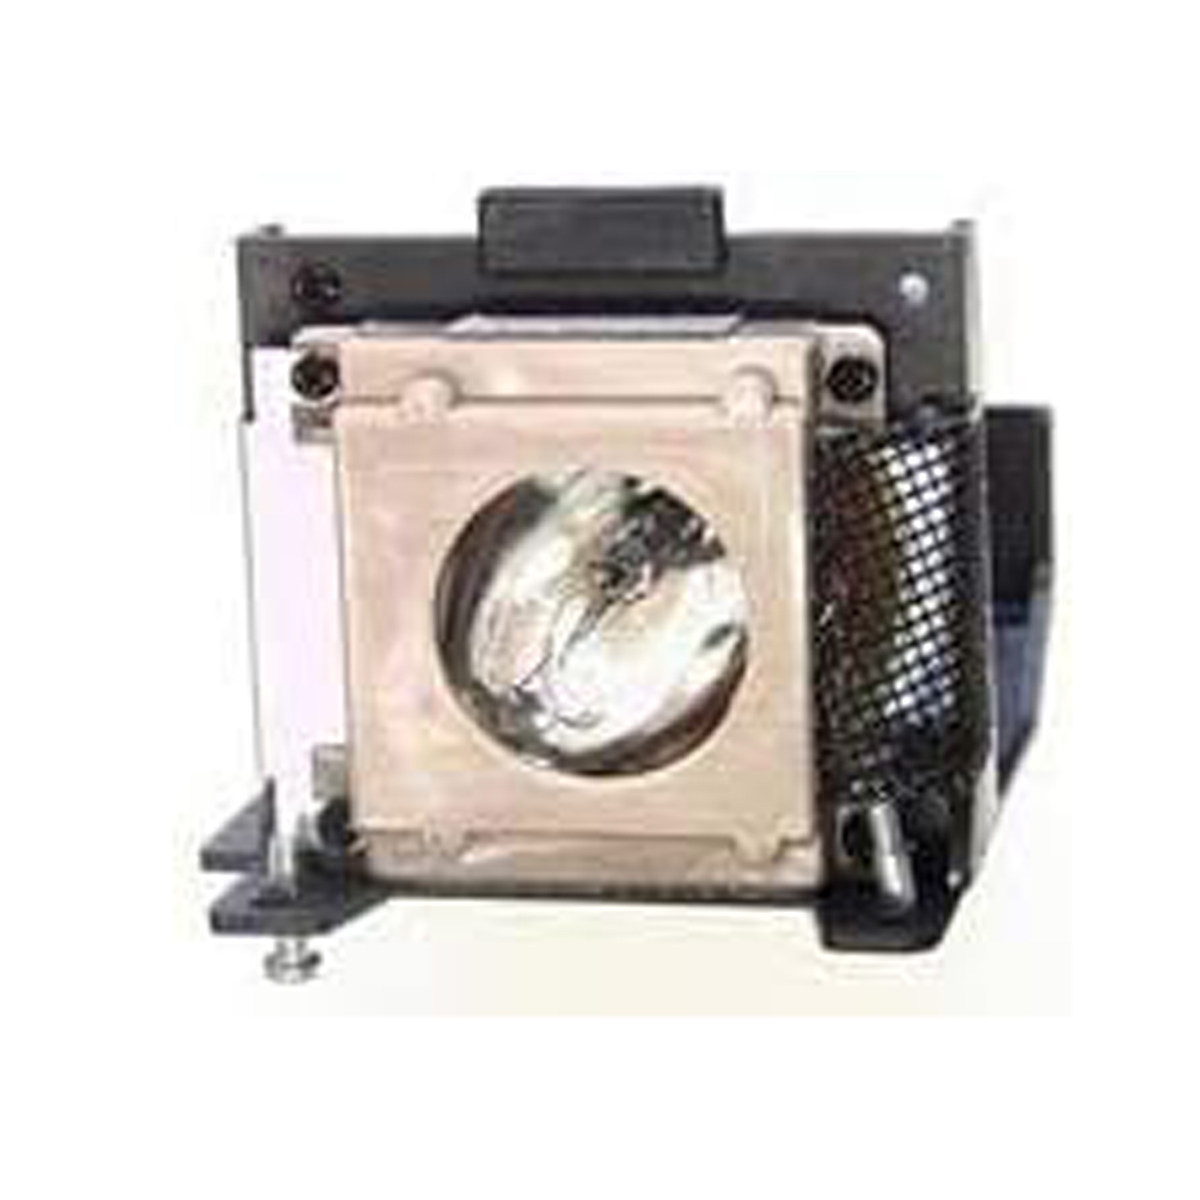 Replacement Projector lamp U2-210/28-300 For PLUS U2-210